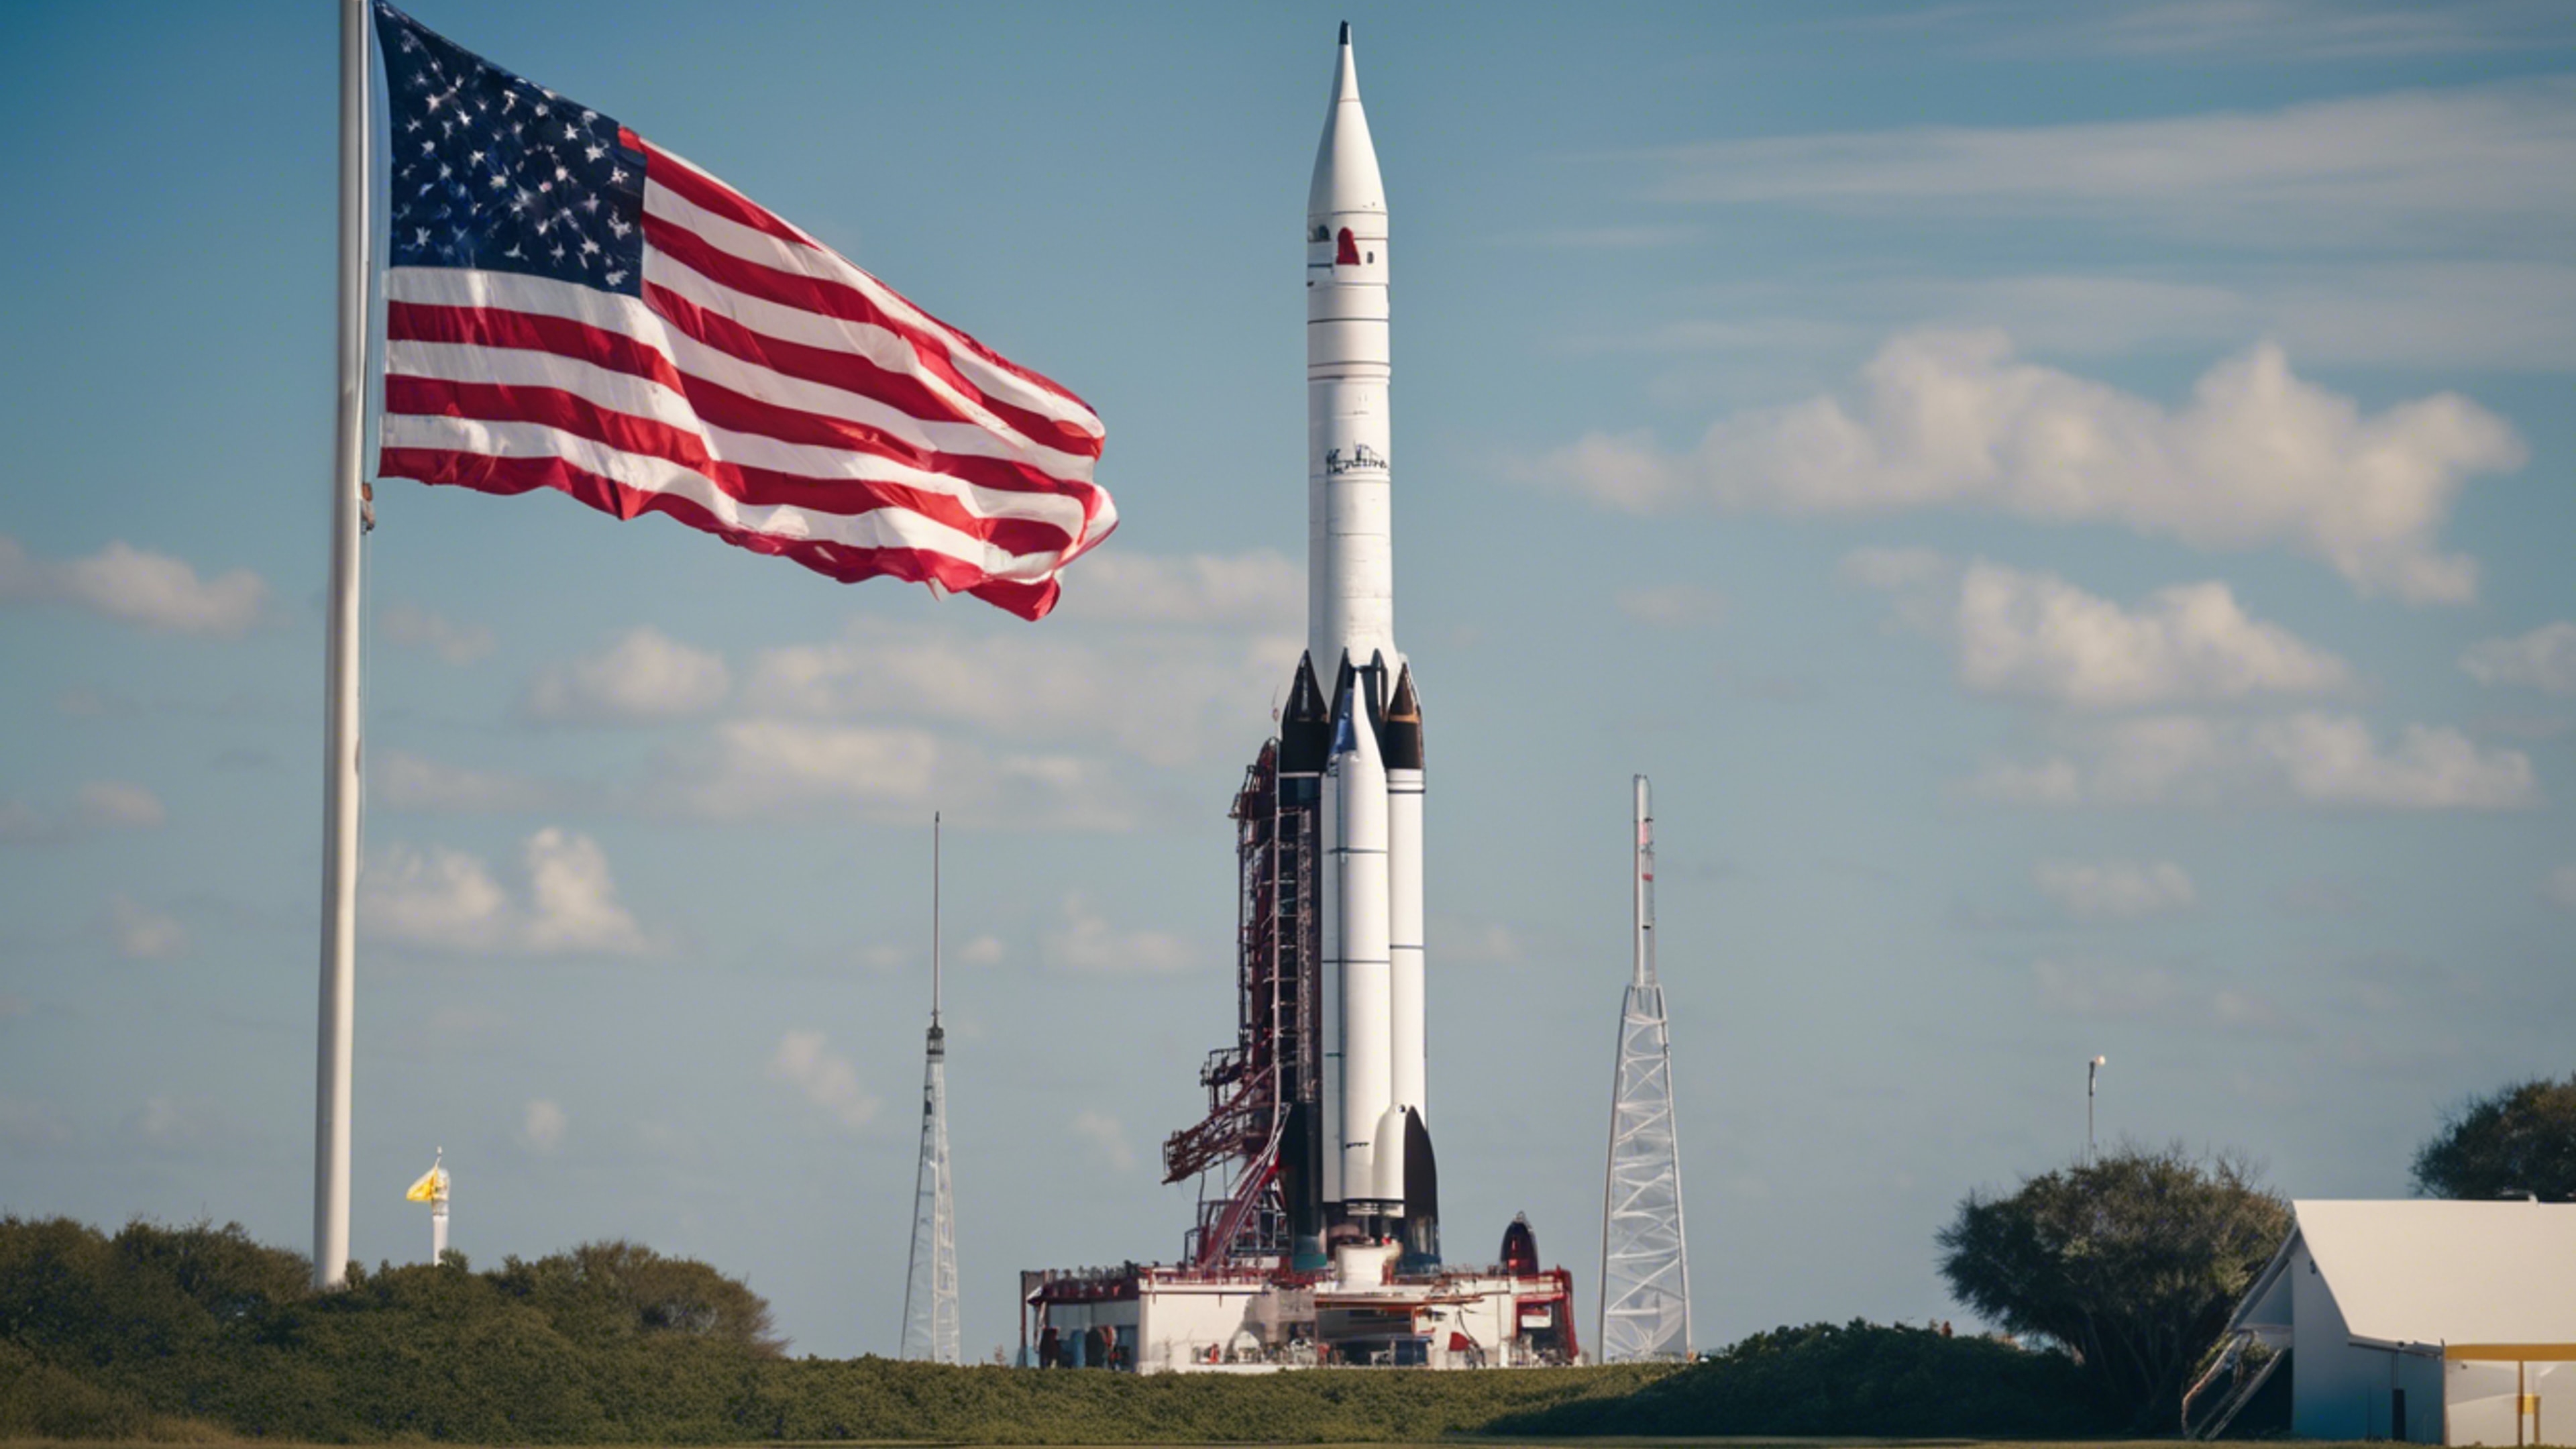 A historic rocket display at Cape Canaveral, with a clear blue sky and the American flag waving in the background. duvar kağıdı[7e3199d5ab33424fb953]